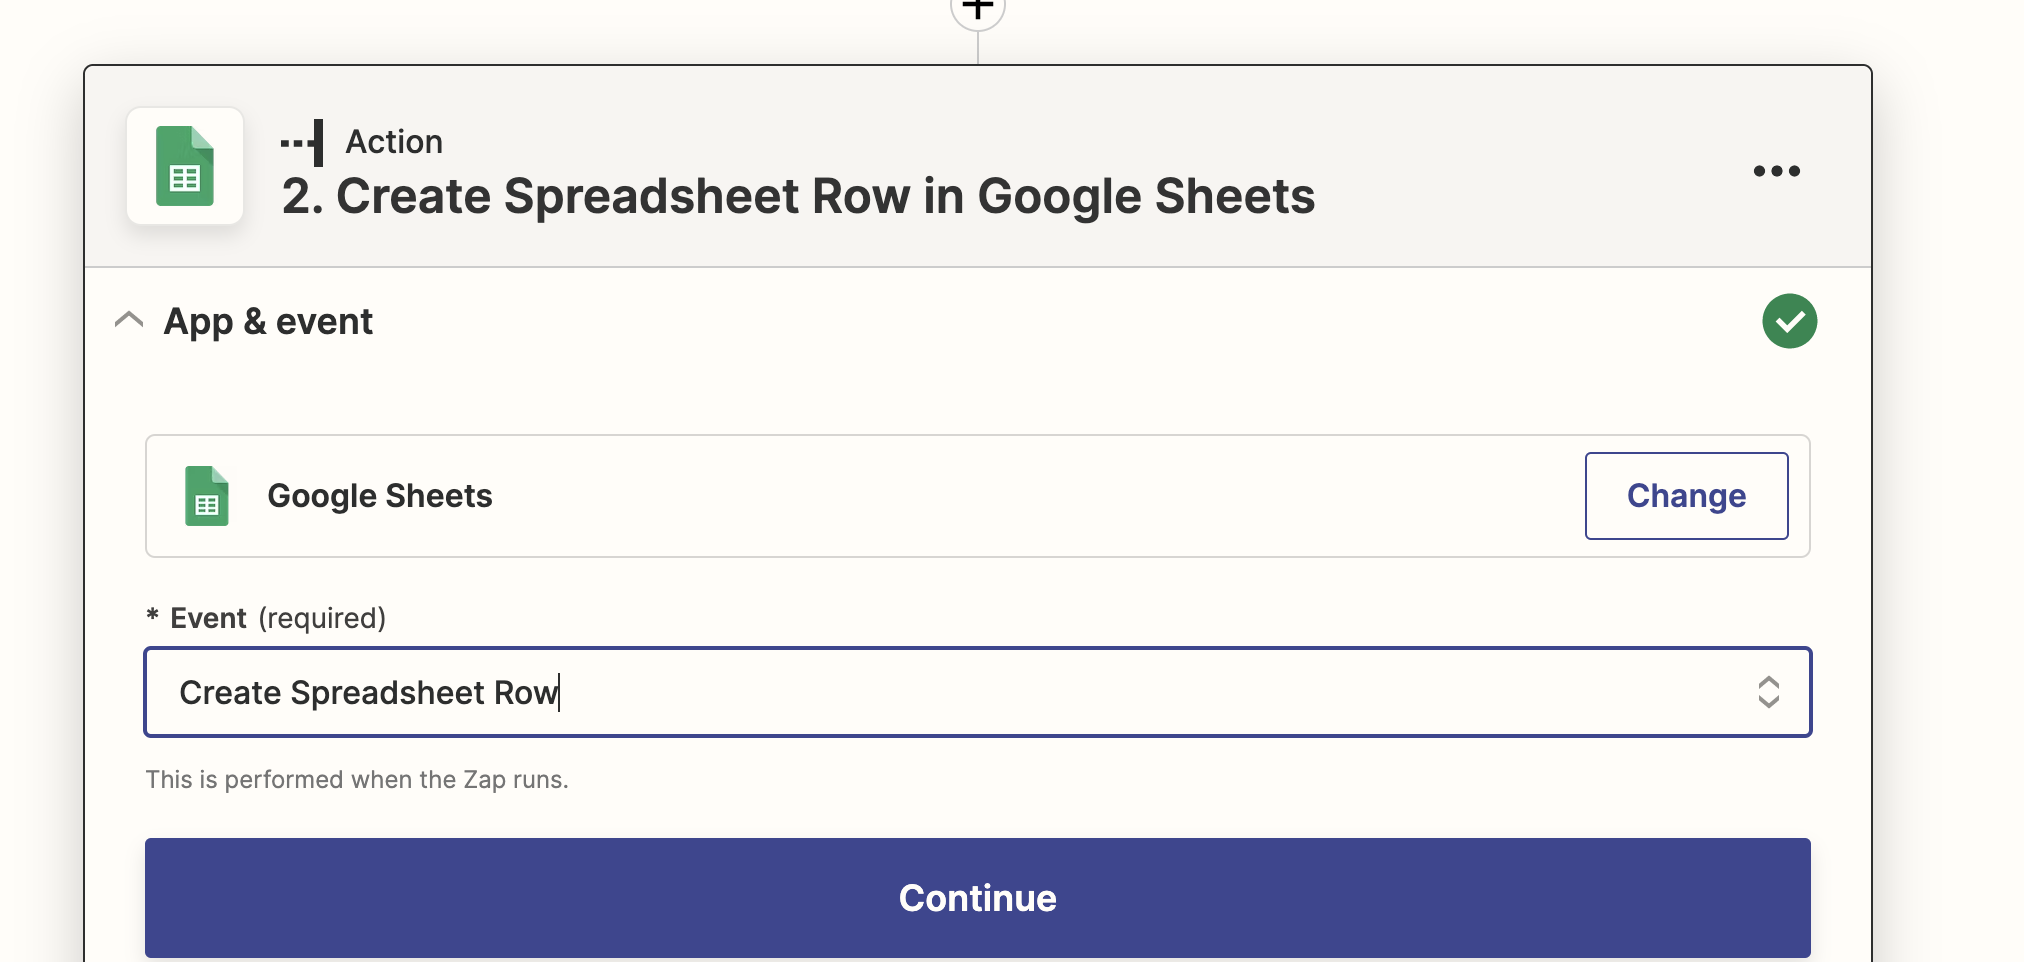 Selecting the Create Spreadsheet Row action in the zap.